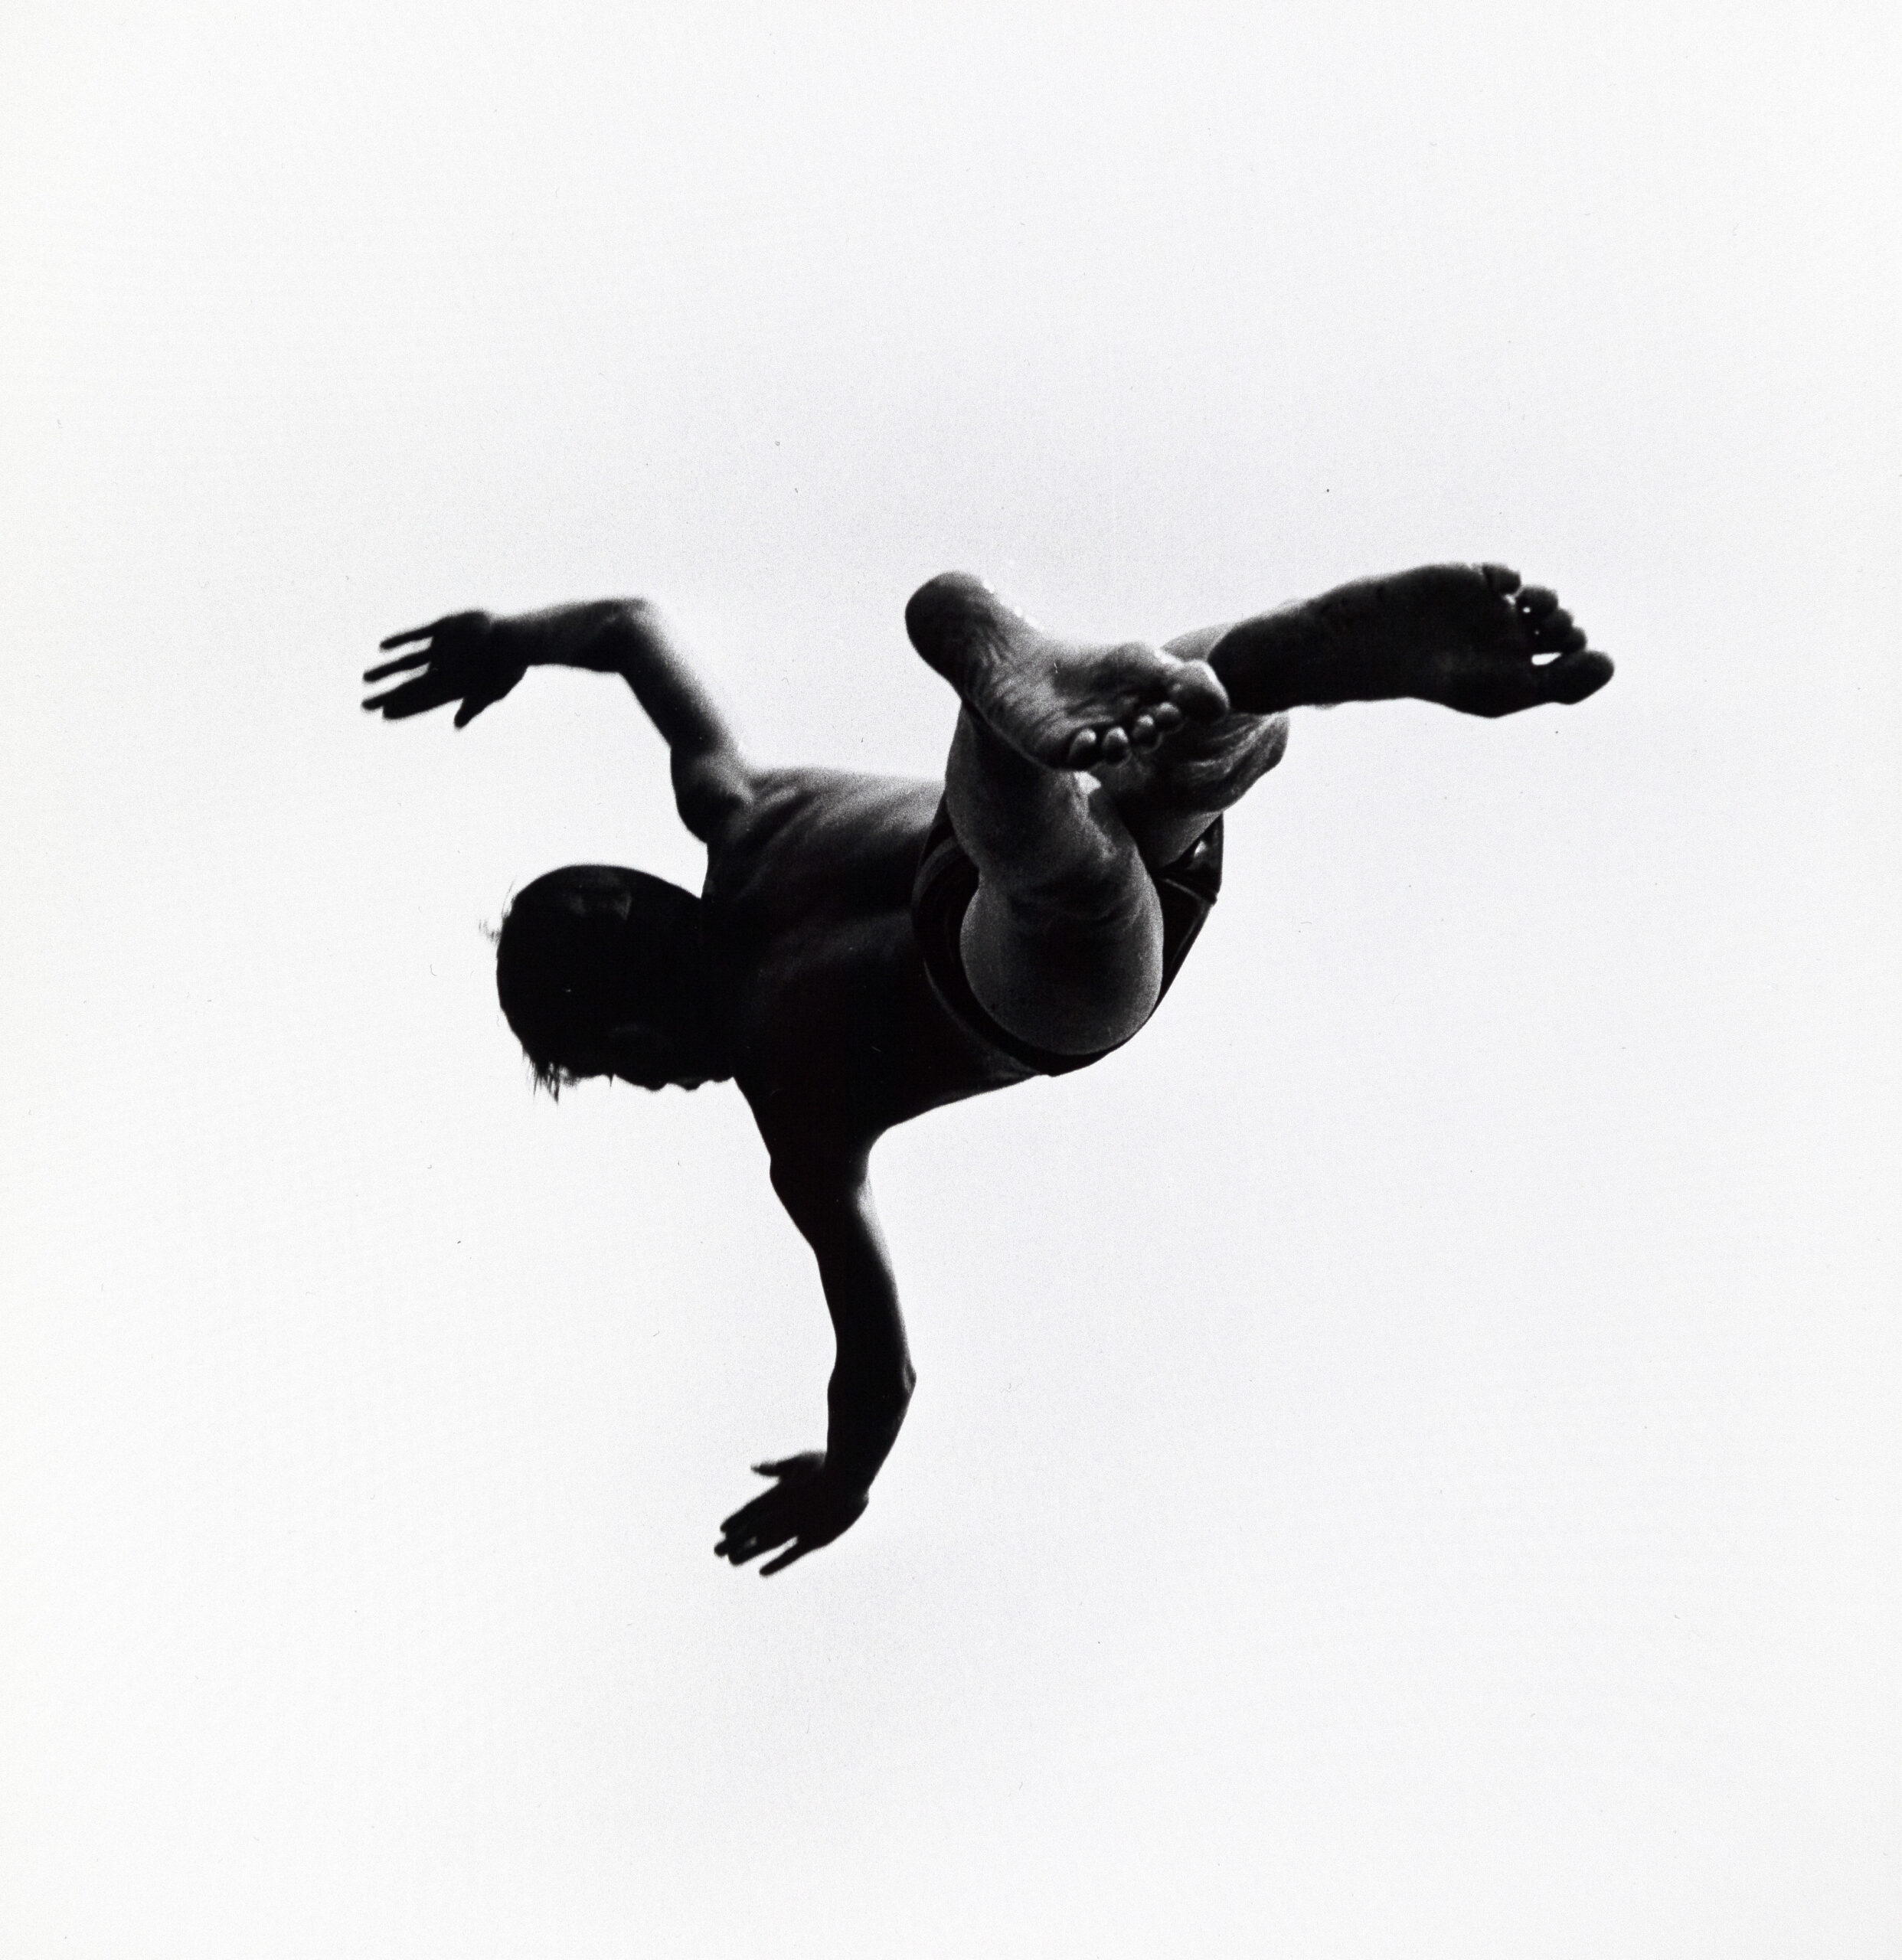 In a black and white image, a man seems to be falling from the sky, surrounded by whiteness